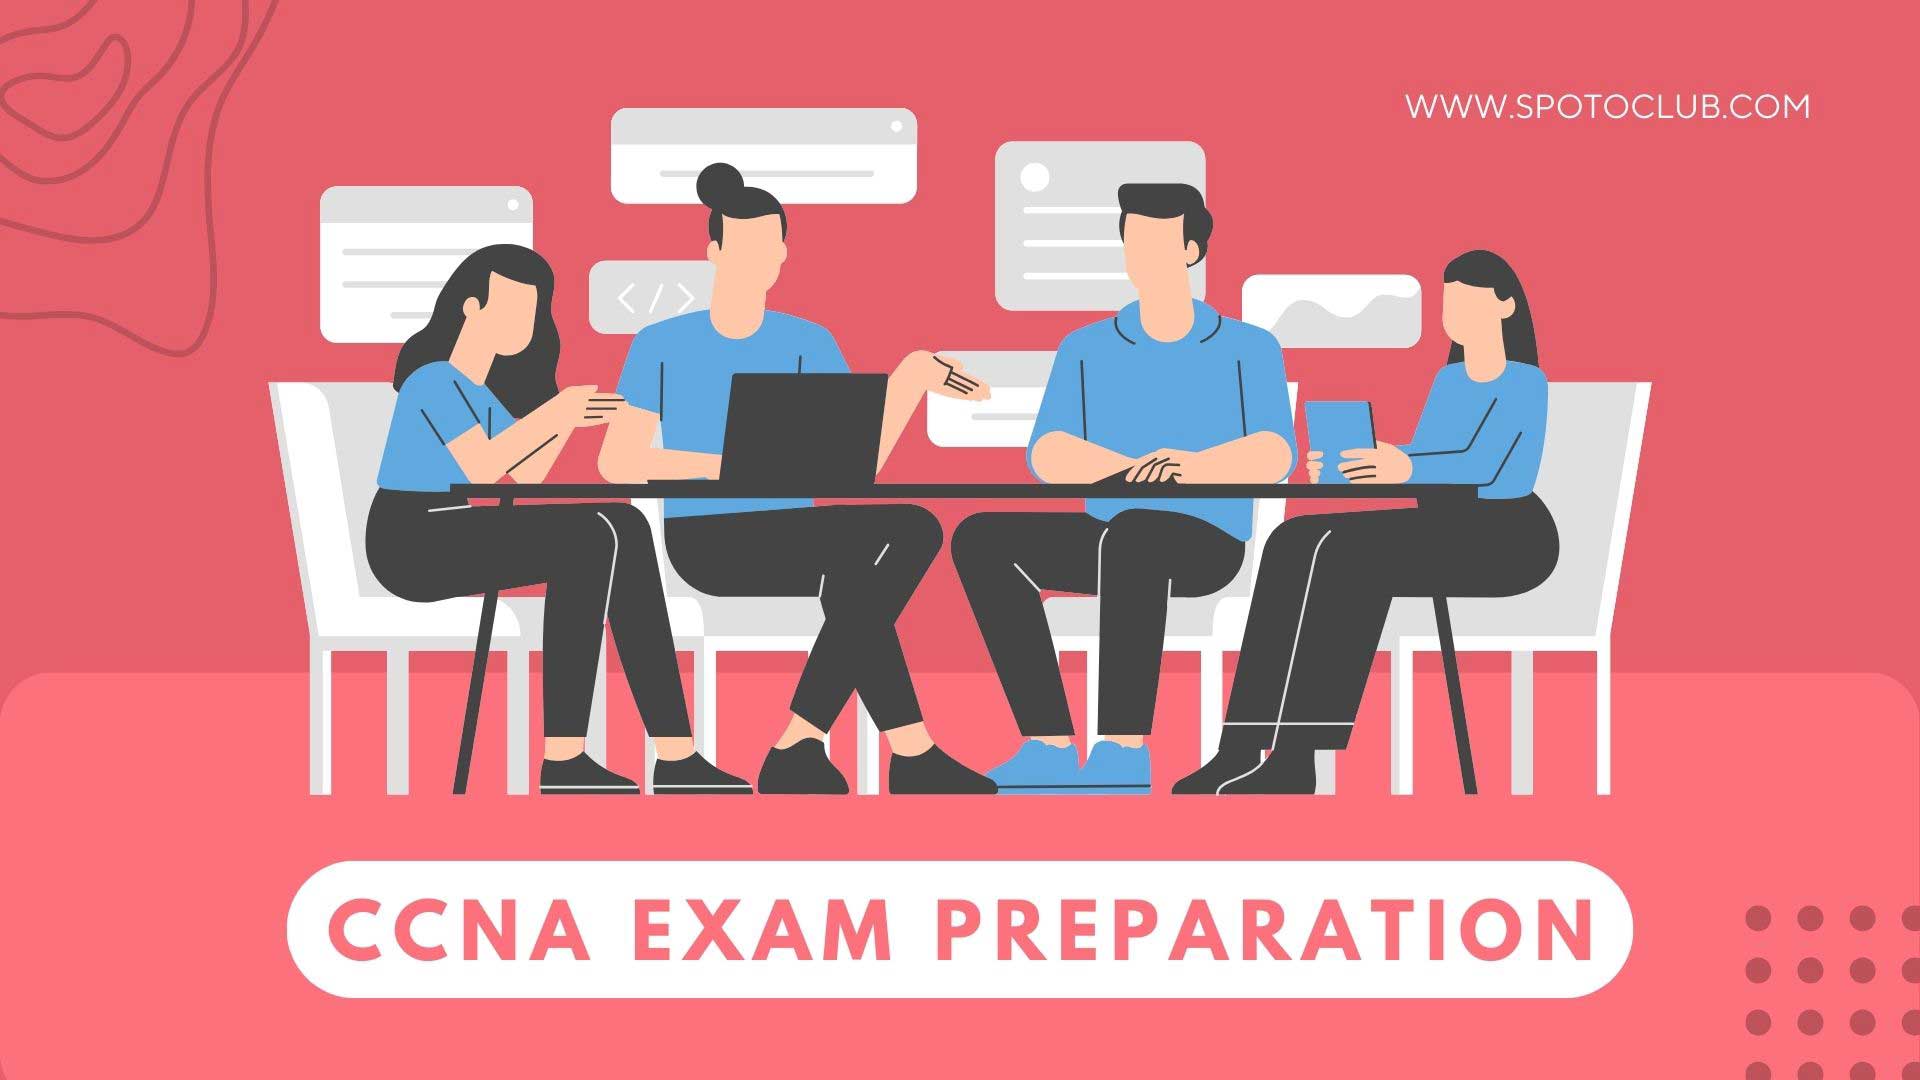 Practice Questions for CCNA